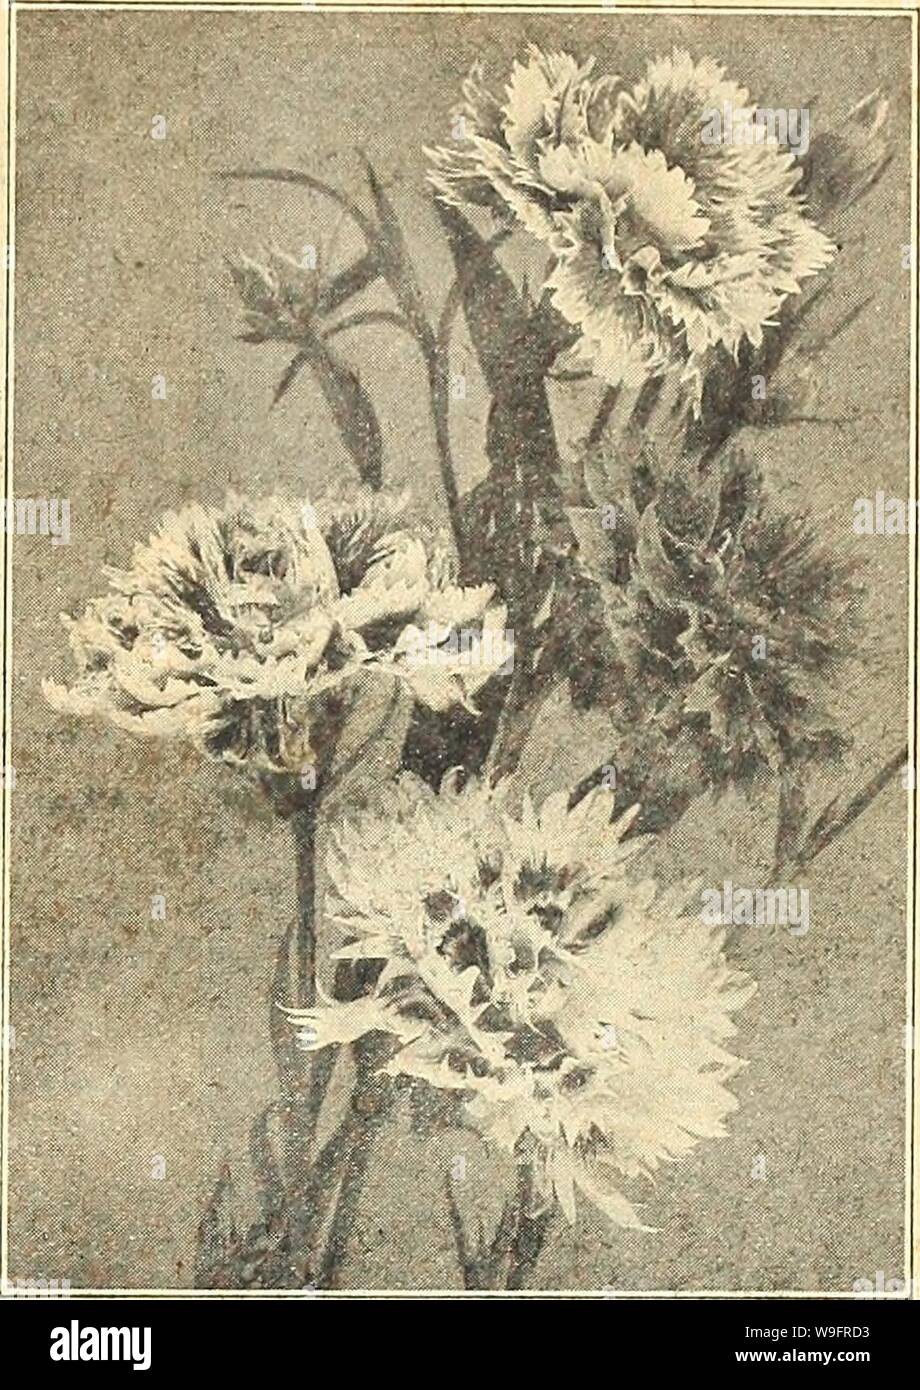 Archive image from page 64 of Currie's farm and garden annual. Currie's farm and garden annual : spring 1921 46th year  curriesfarmgarde19curr 4 Year: 1921 ( DIanthus (Annual Pinks). HARDY PERENNIAL PINKS Pkt. Dwarf Erfurt Double Hardy Pink. (Plumarius nanus, fl. pi.)—A very early, dwarf, compact class. The flowers possess a delightful spicy or clove fragrance, and are of all colors 10 Sweet Scented Diadem Pink (Plumarius Diadematus)—Has the beautiful markings of the Diadem Pinks combined with a sweet, spicy fragrance; flowers single.  oz. 40c 10 Perpetual Cyclop Pink (Plumarius Semperflorens) Stock Photo